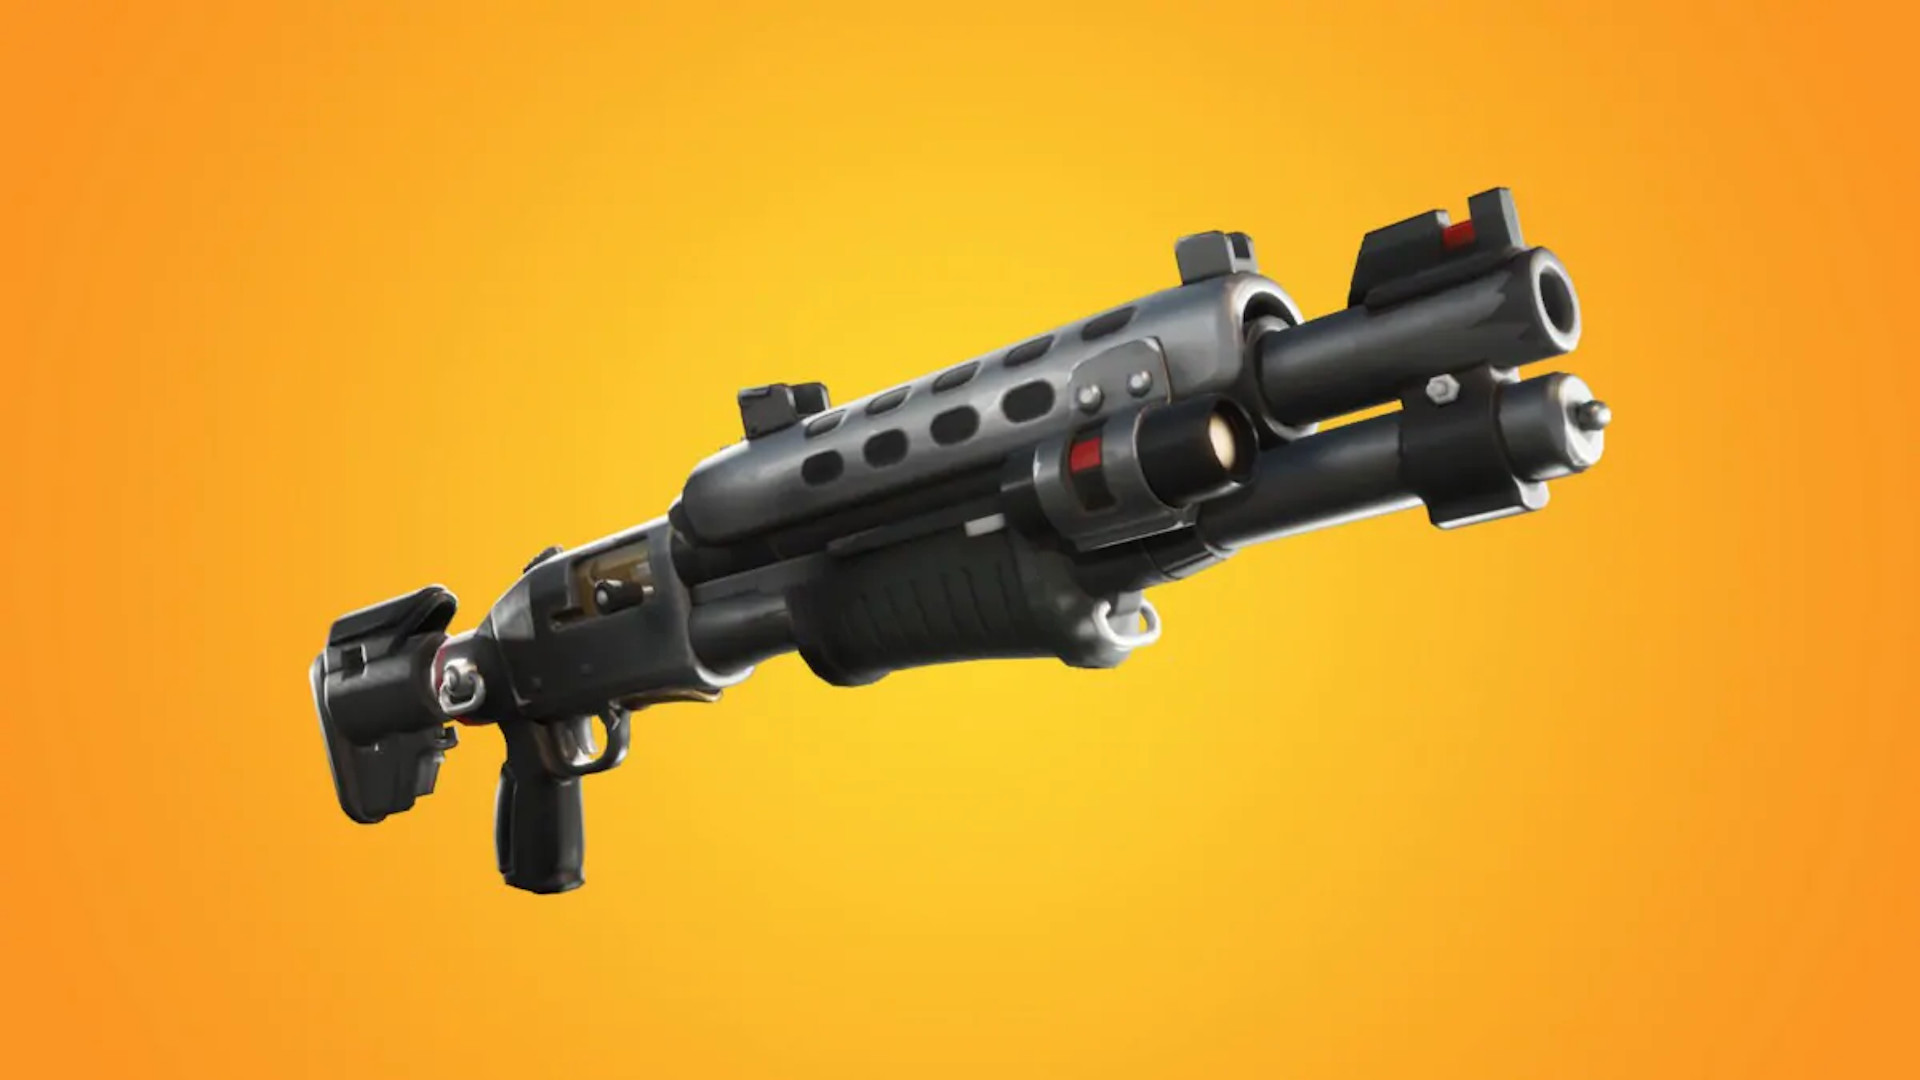 Hit Rifle In Fortnite Fortnite Chapter 2 Season 7 Tier List The Best Weapons And How To Craft Them The Loadout